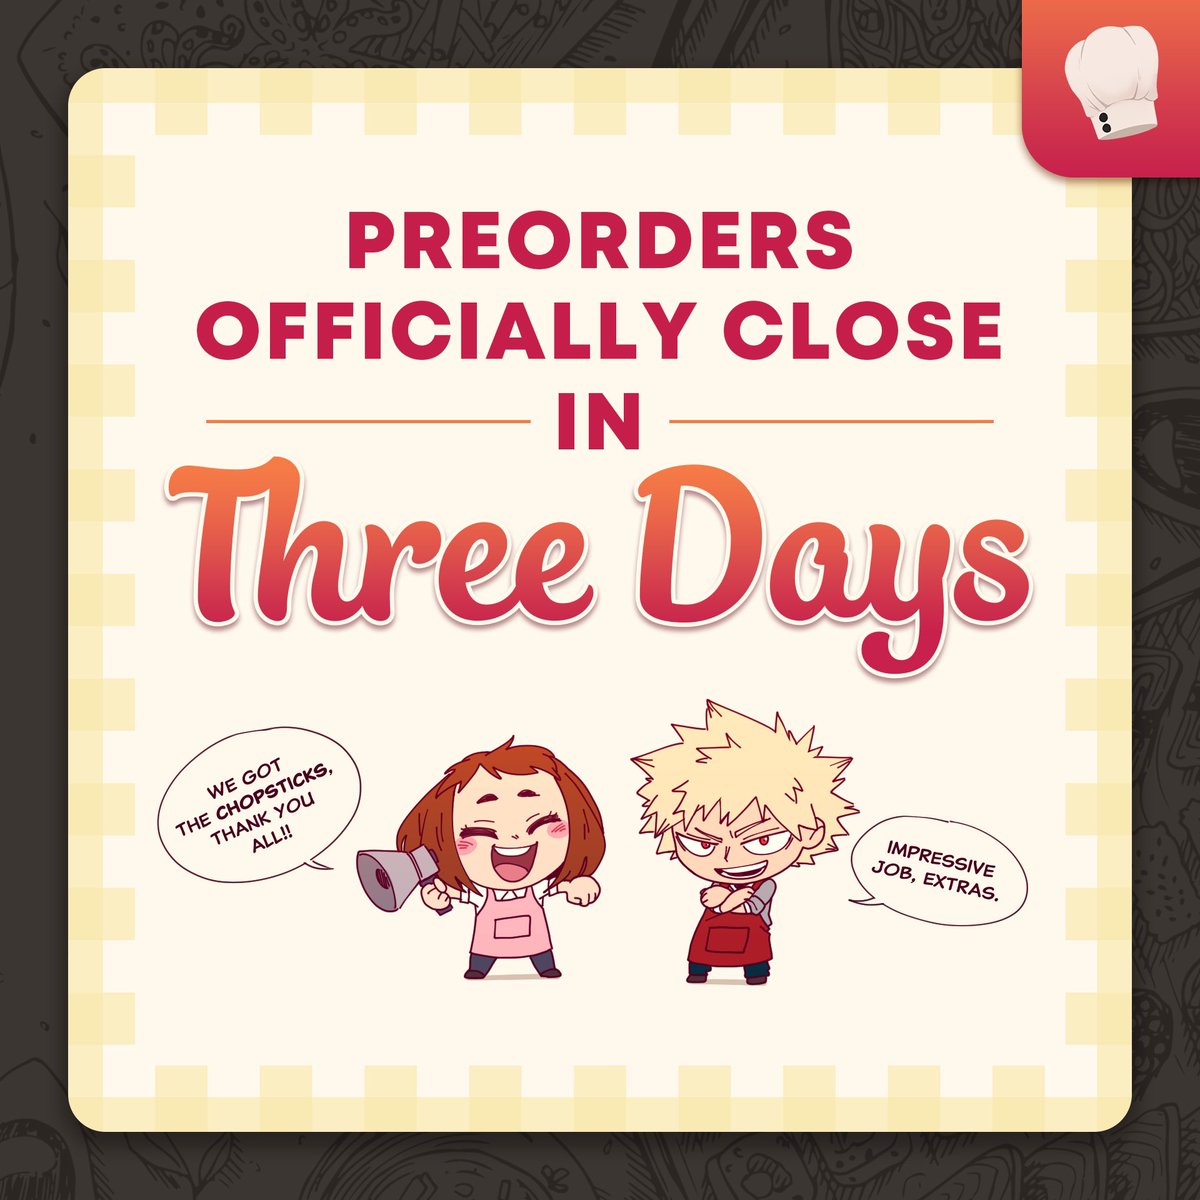 🍥 3 DAYS UNTIL PO’s  CLOSE 🍡

Preorders officially close in 3 DAYS on May 18th at 11:59 PM CDT.

Don’t miss this final opportunity! All stretch goals have been unlocked~

kacchakoskitchen.bigcartel.com